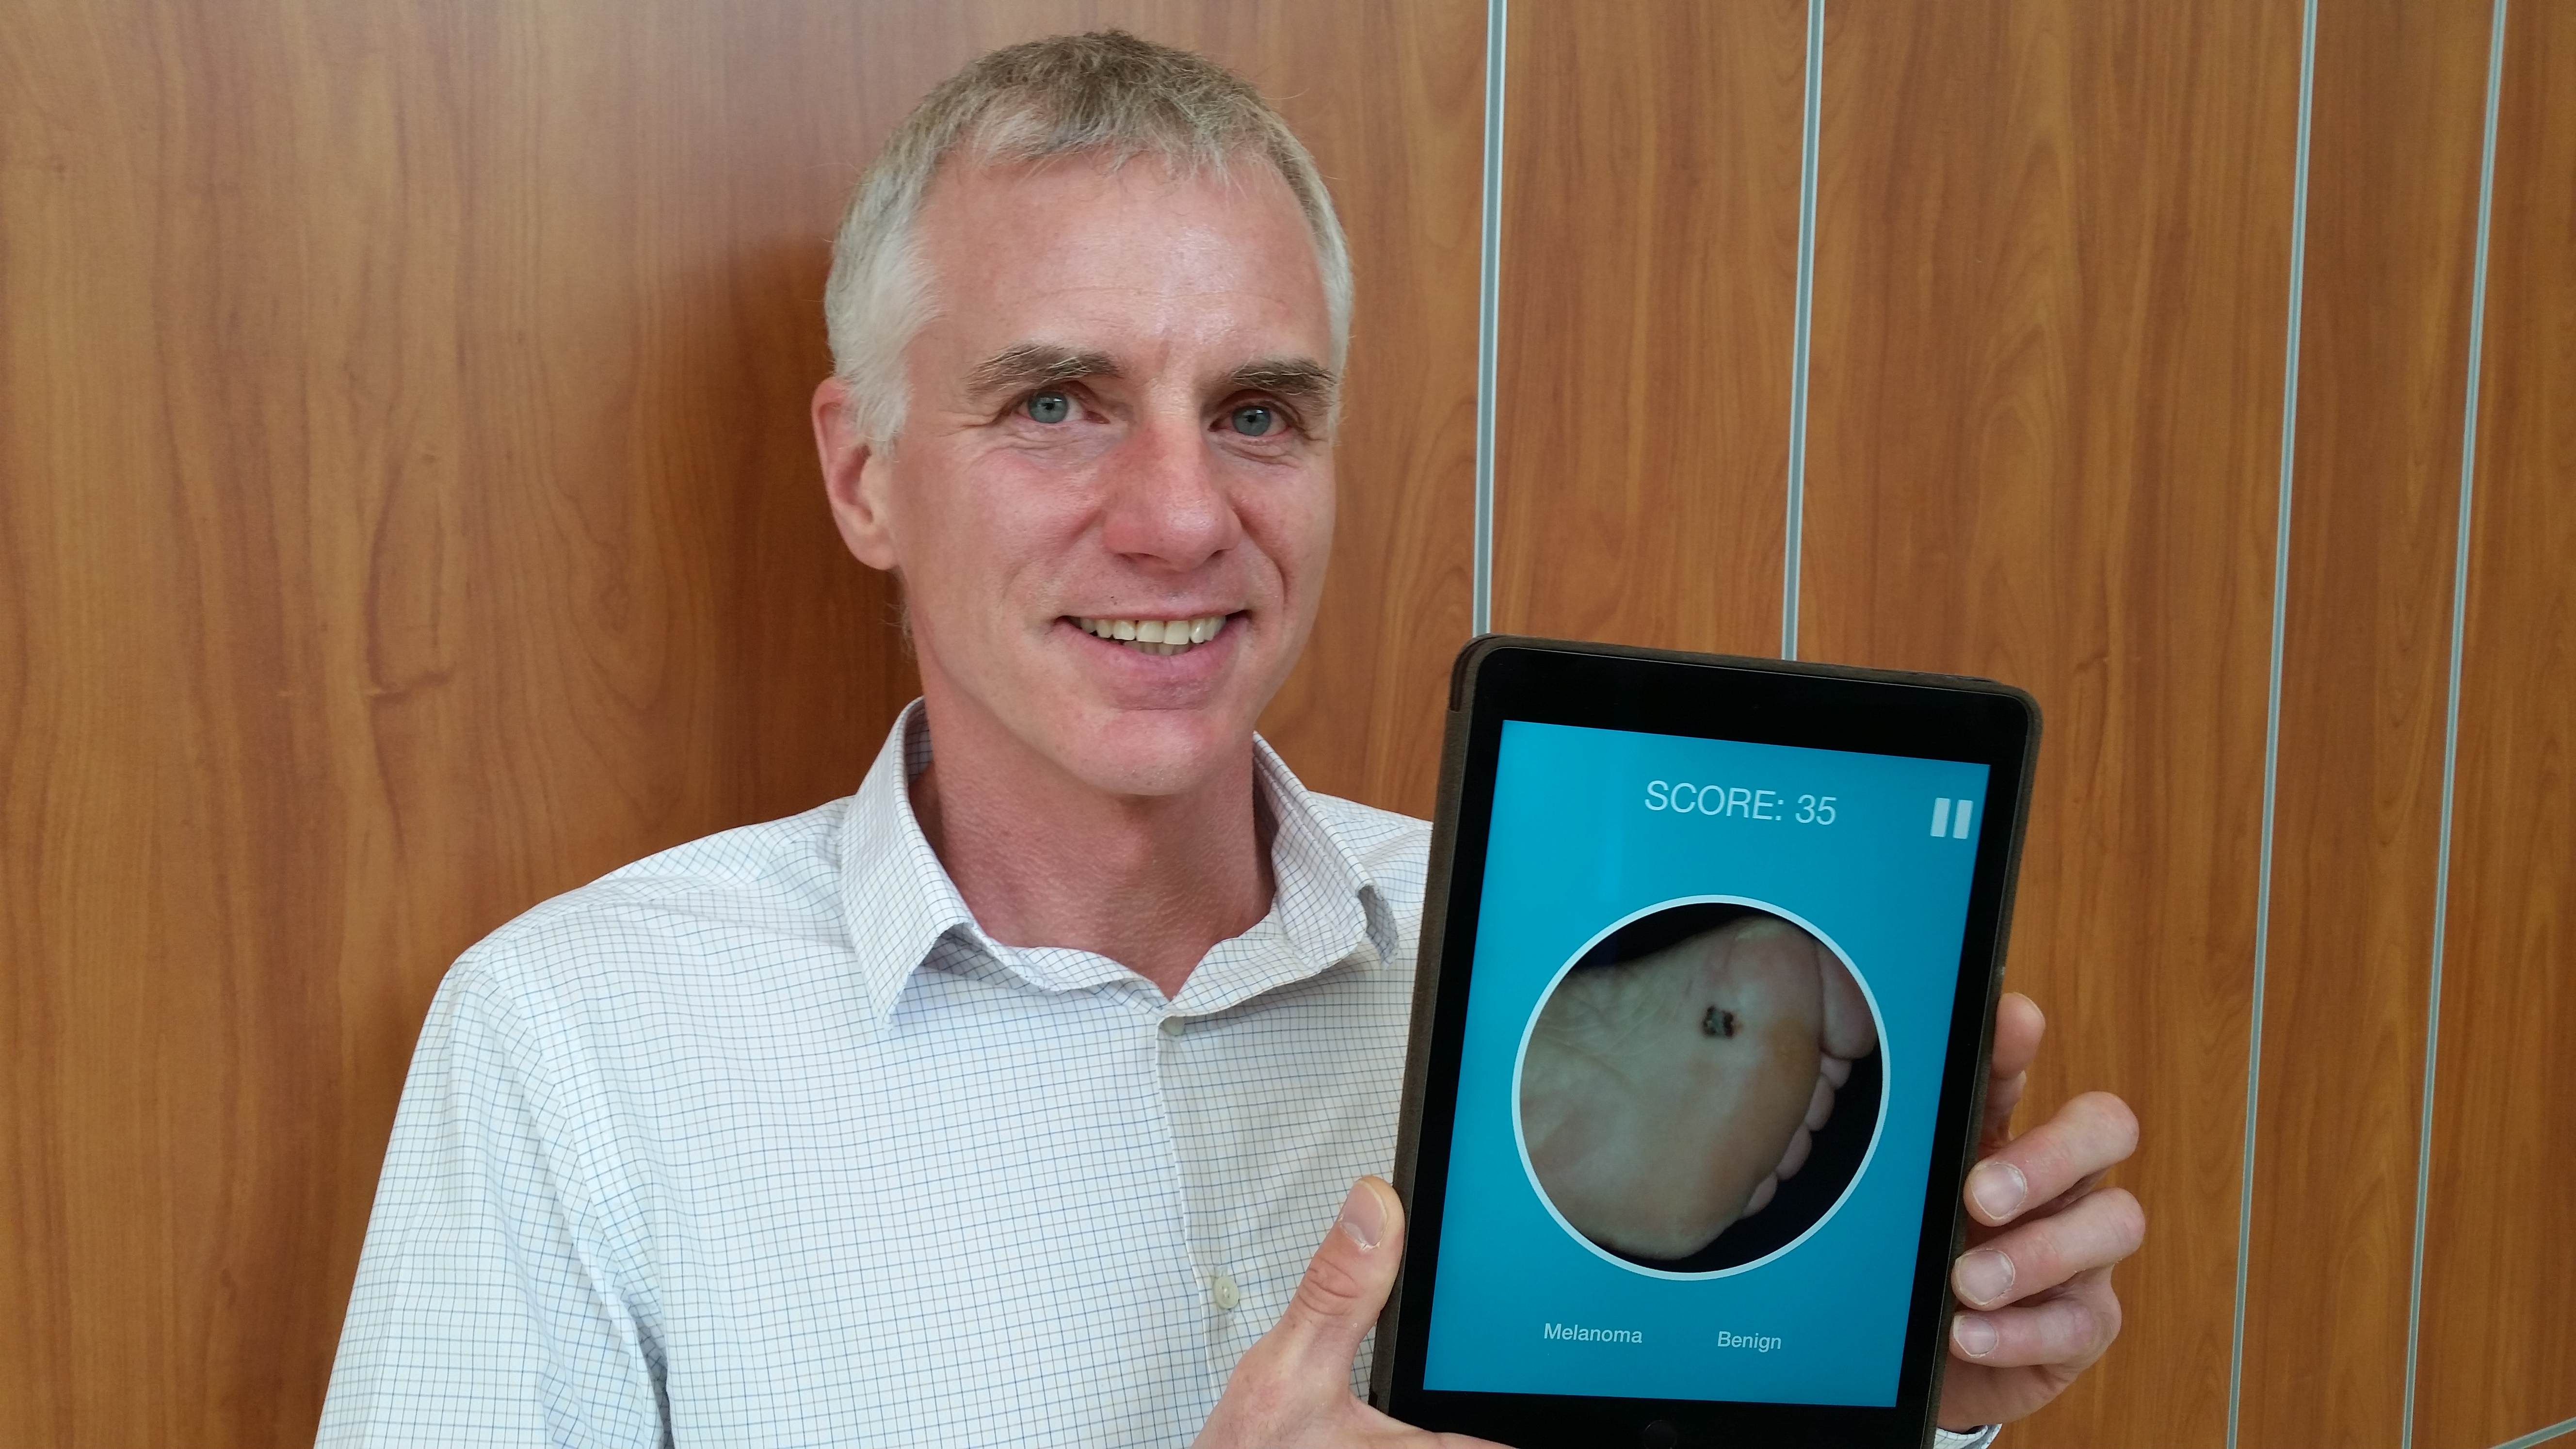 Liam Rourke shows an Ipad app that's been developed to help train health professionals to identify skin lesions